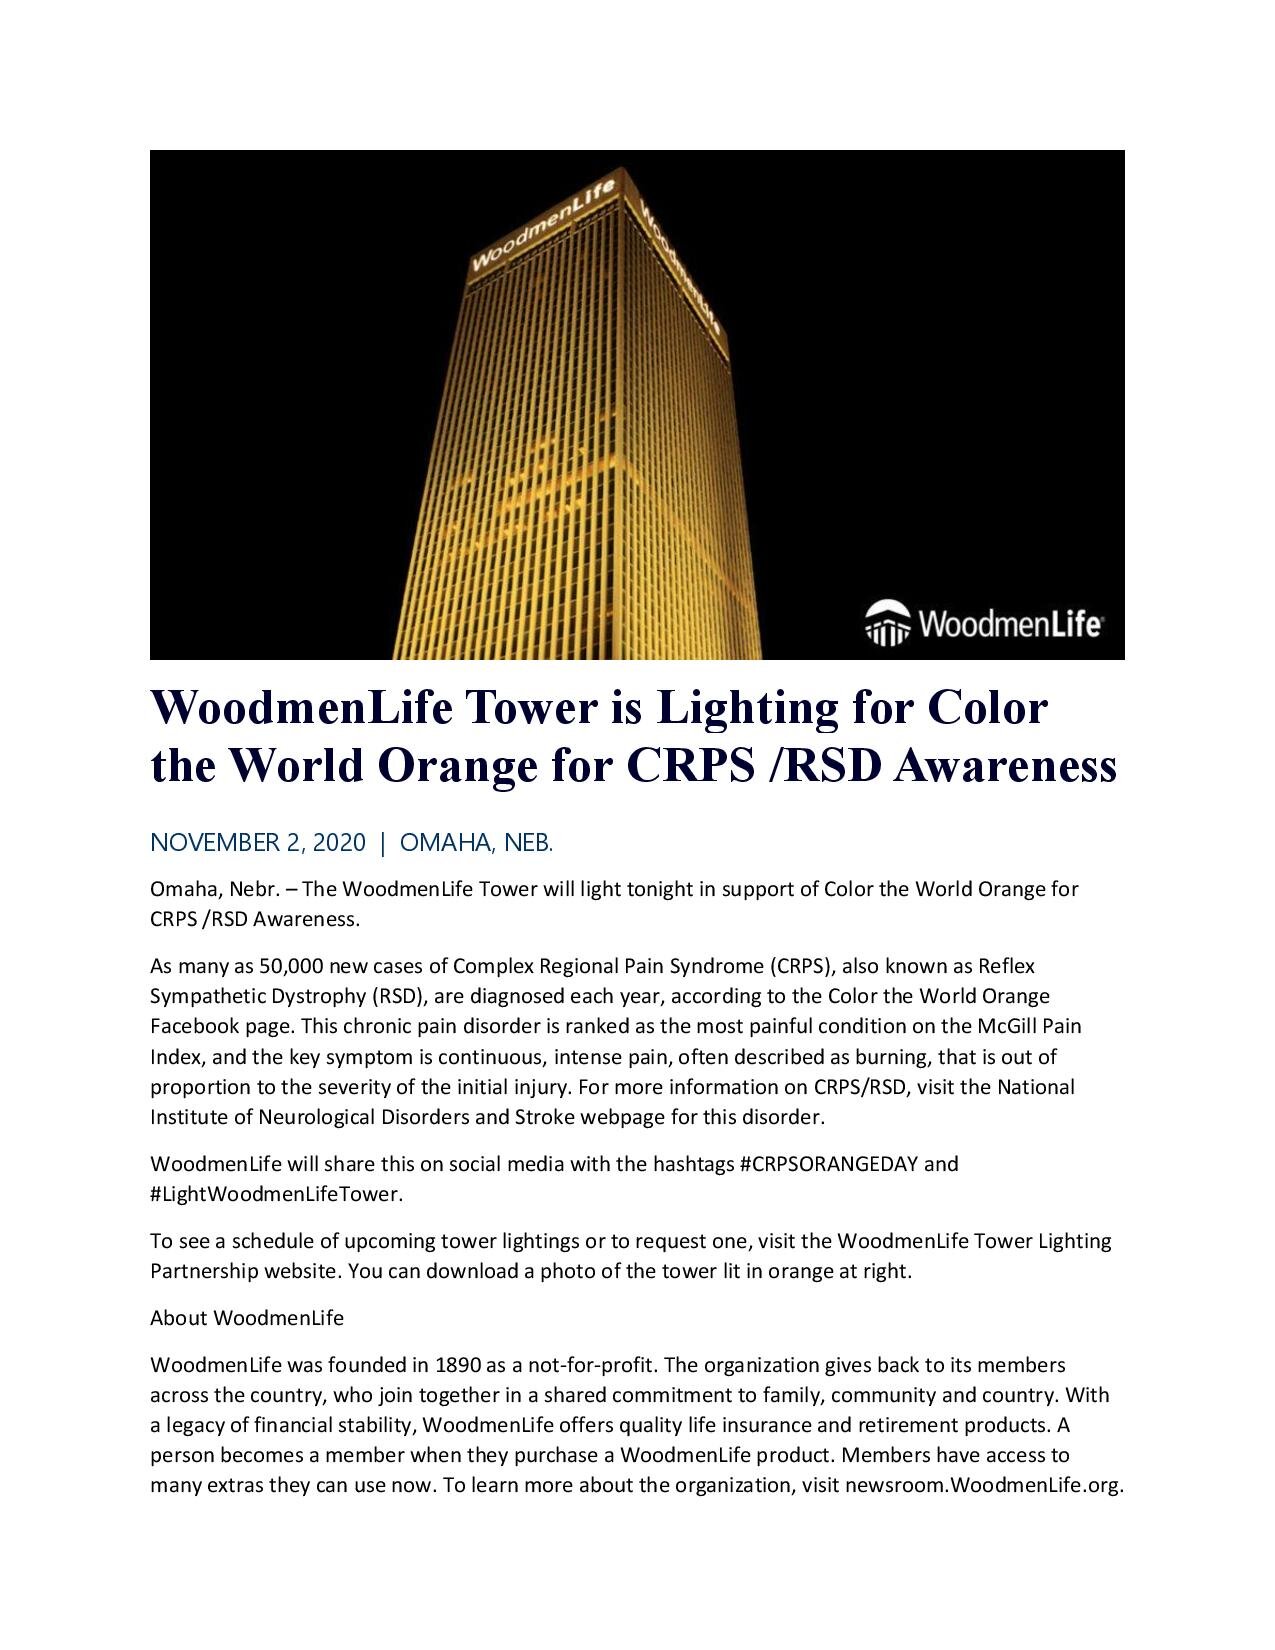 WoodmenLife Tower is Lighting for Color the World Orange for CRPS-page-001.jpg